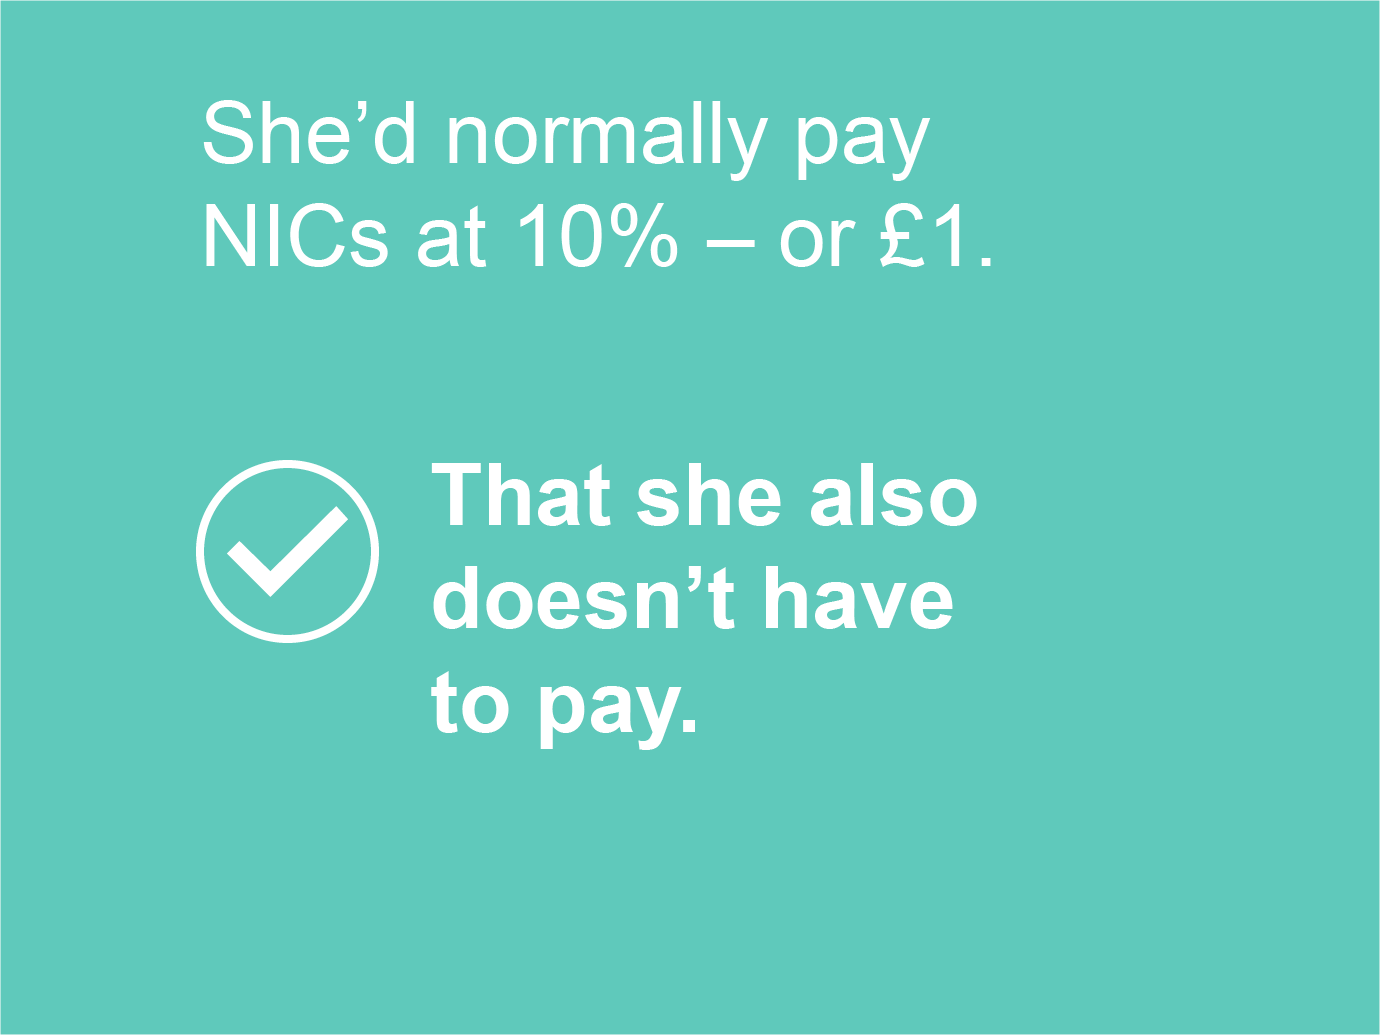 She'd normally pay NICs at 10% - or £1. That she also doesn't have to pay.